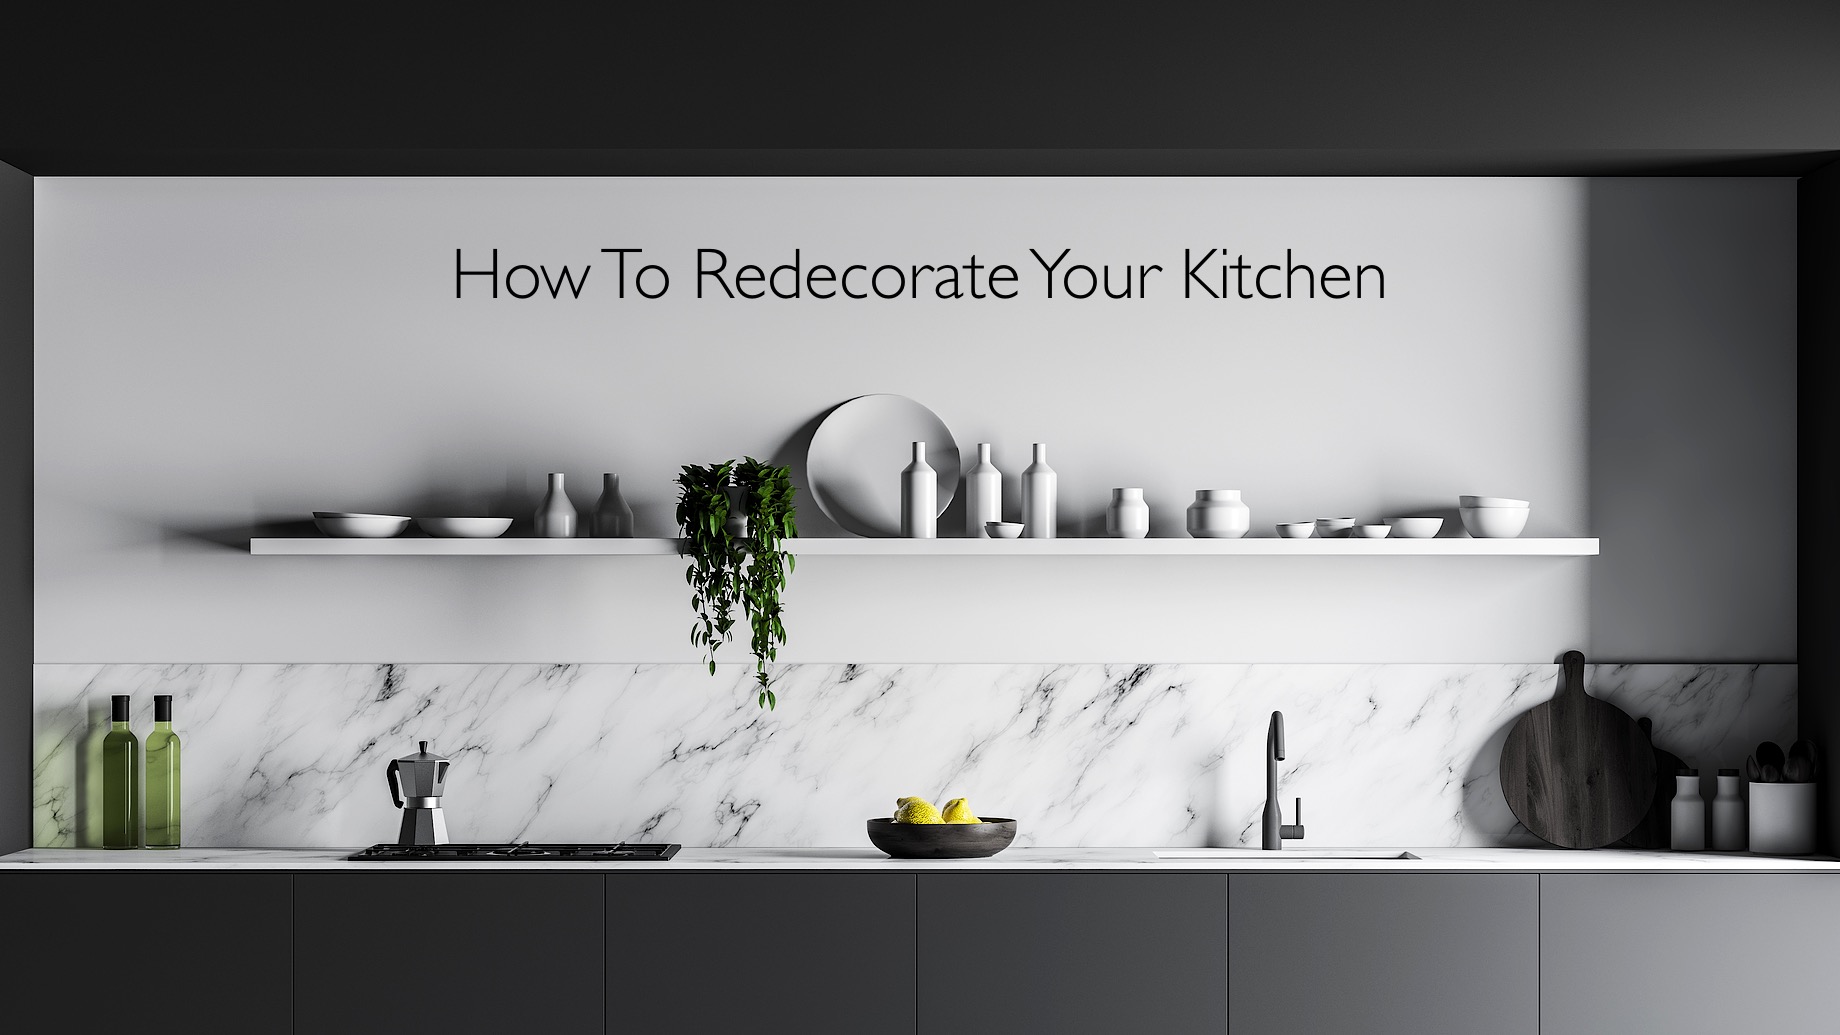 How To Redecorate Your Kitchen